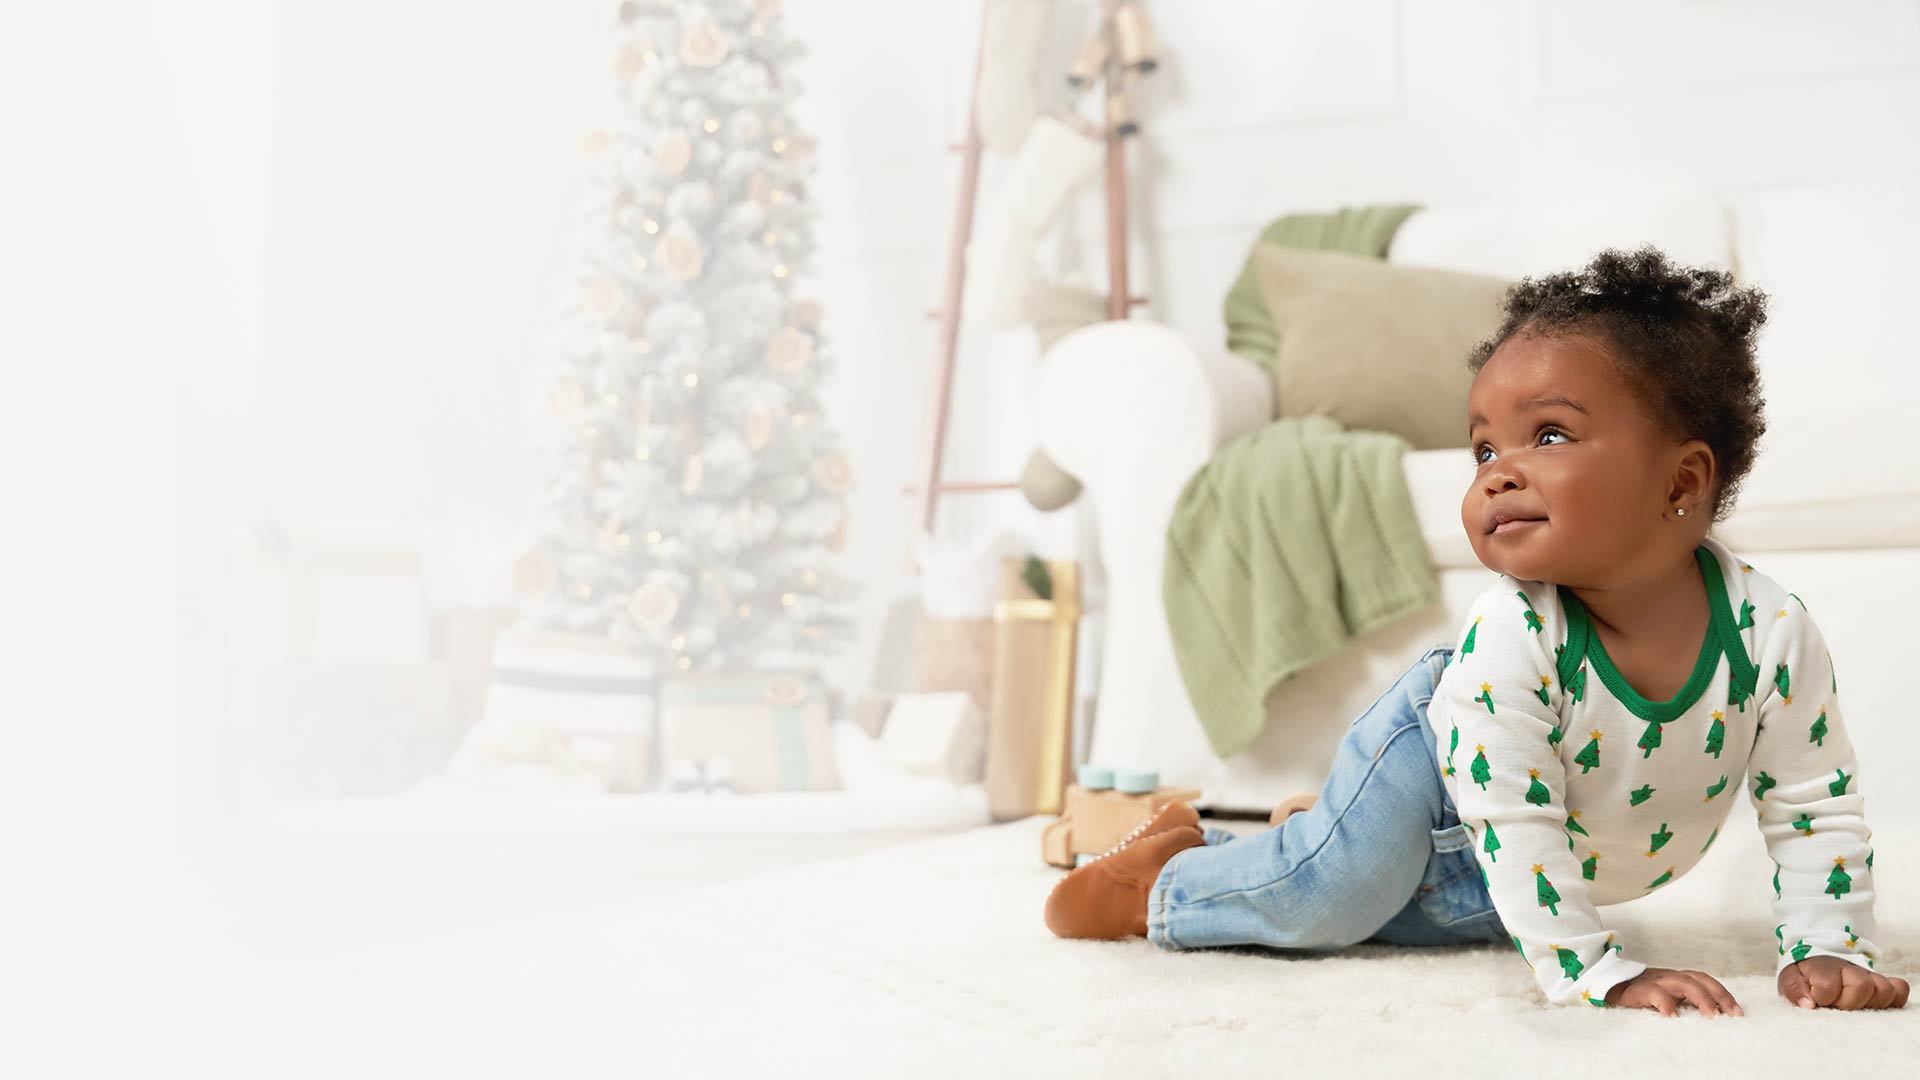 A precious infant eagerly exploring the floor, enchanted by the magical presence of a Christmas tree adorned with ornaments.